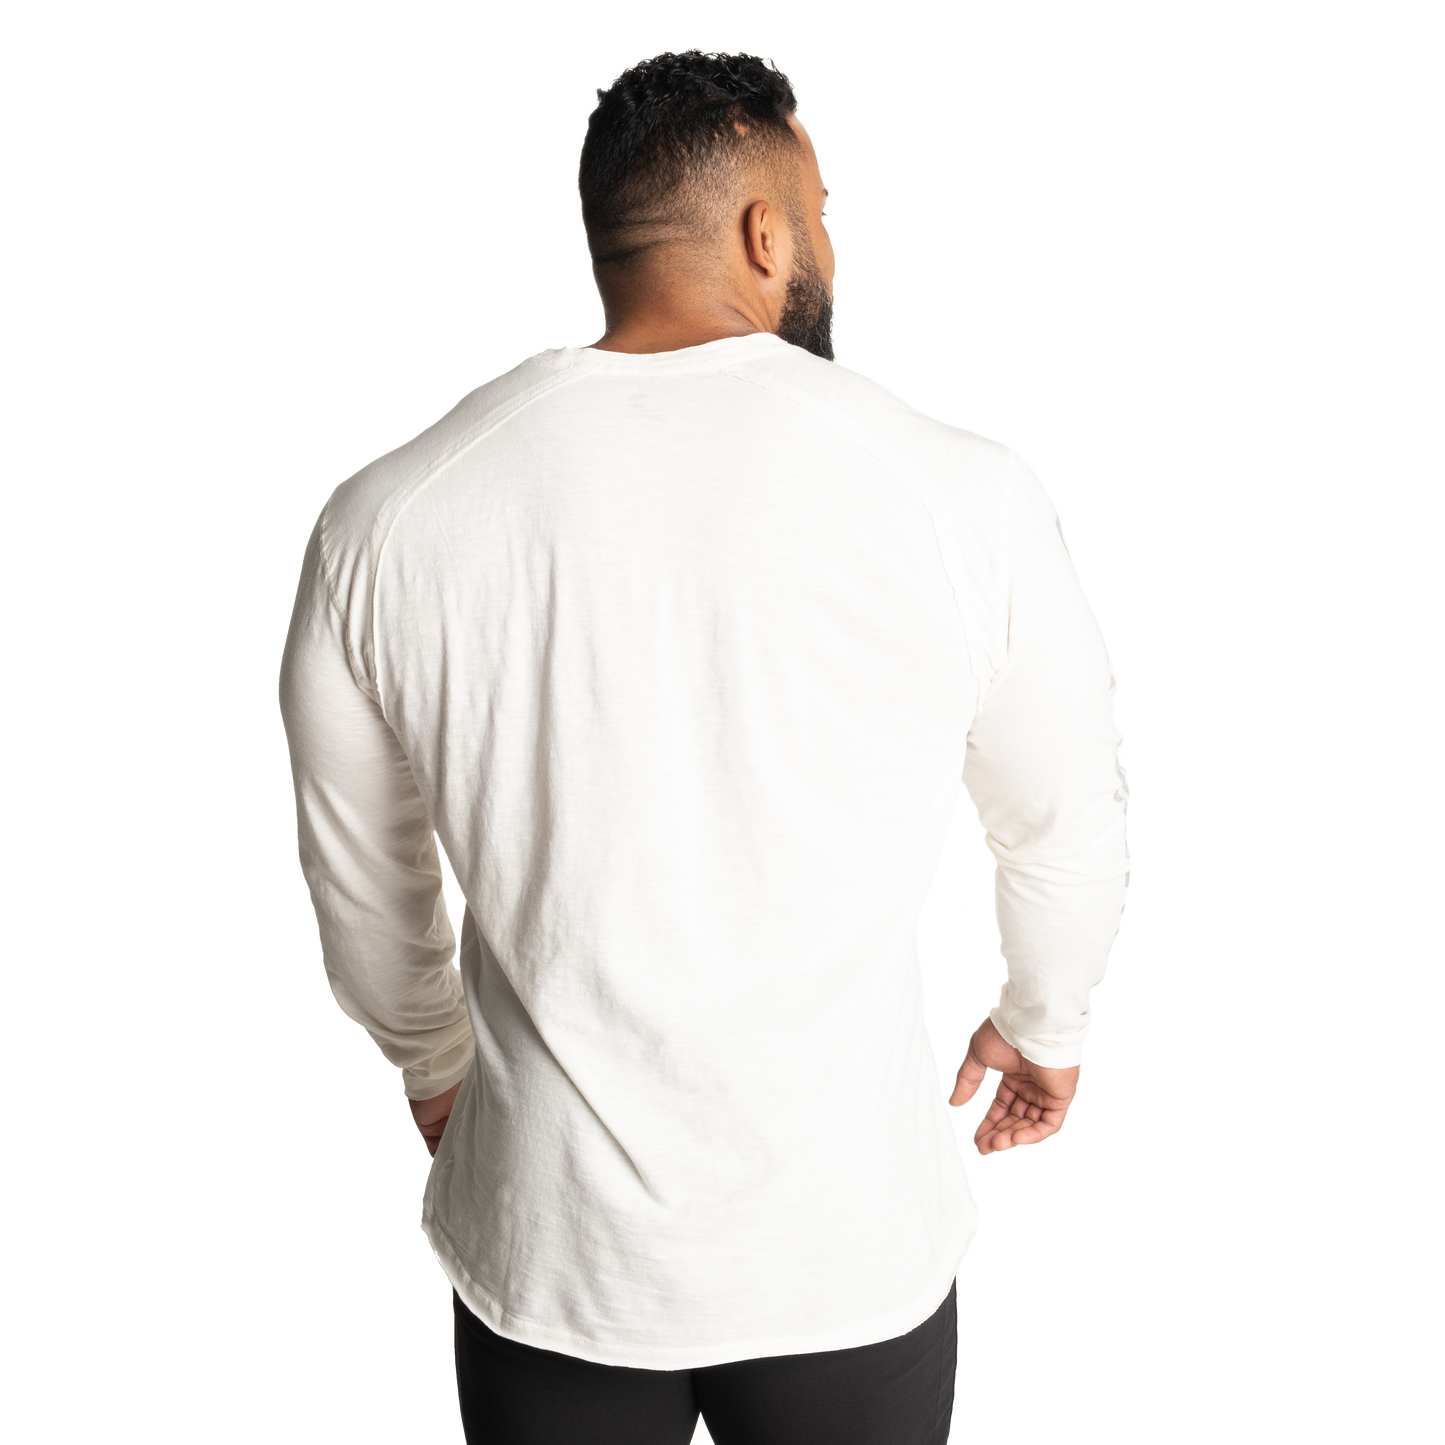 GASP Throwback Long Sleeve Tee, Off White